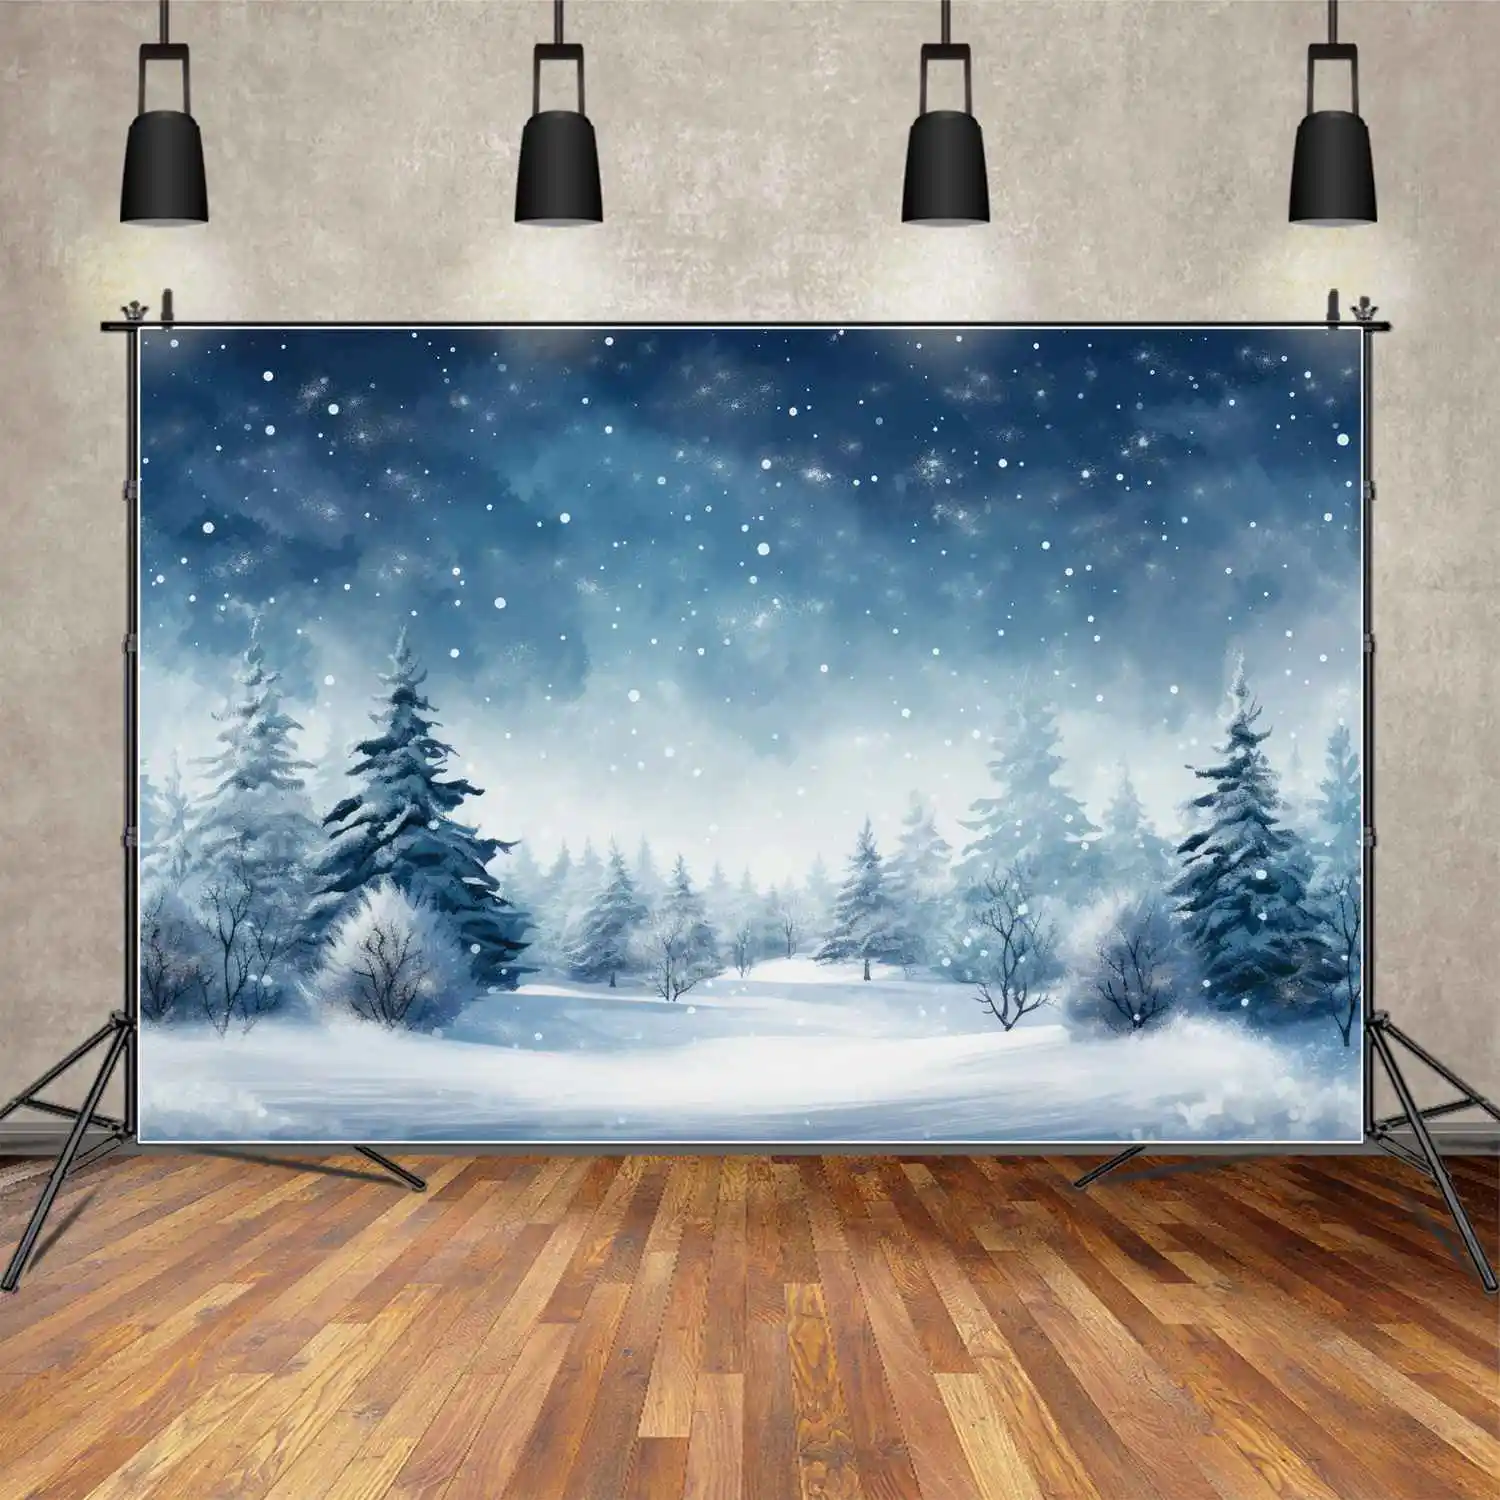 

MOON.QG Backdrop Snow Snowflake Winter Blue Sky Forest Tree Photo Booth Background Customized Children Holiday Party Decorations